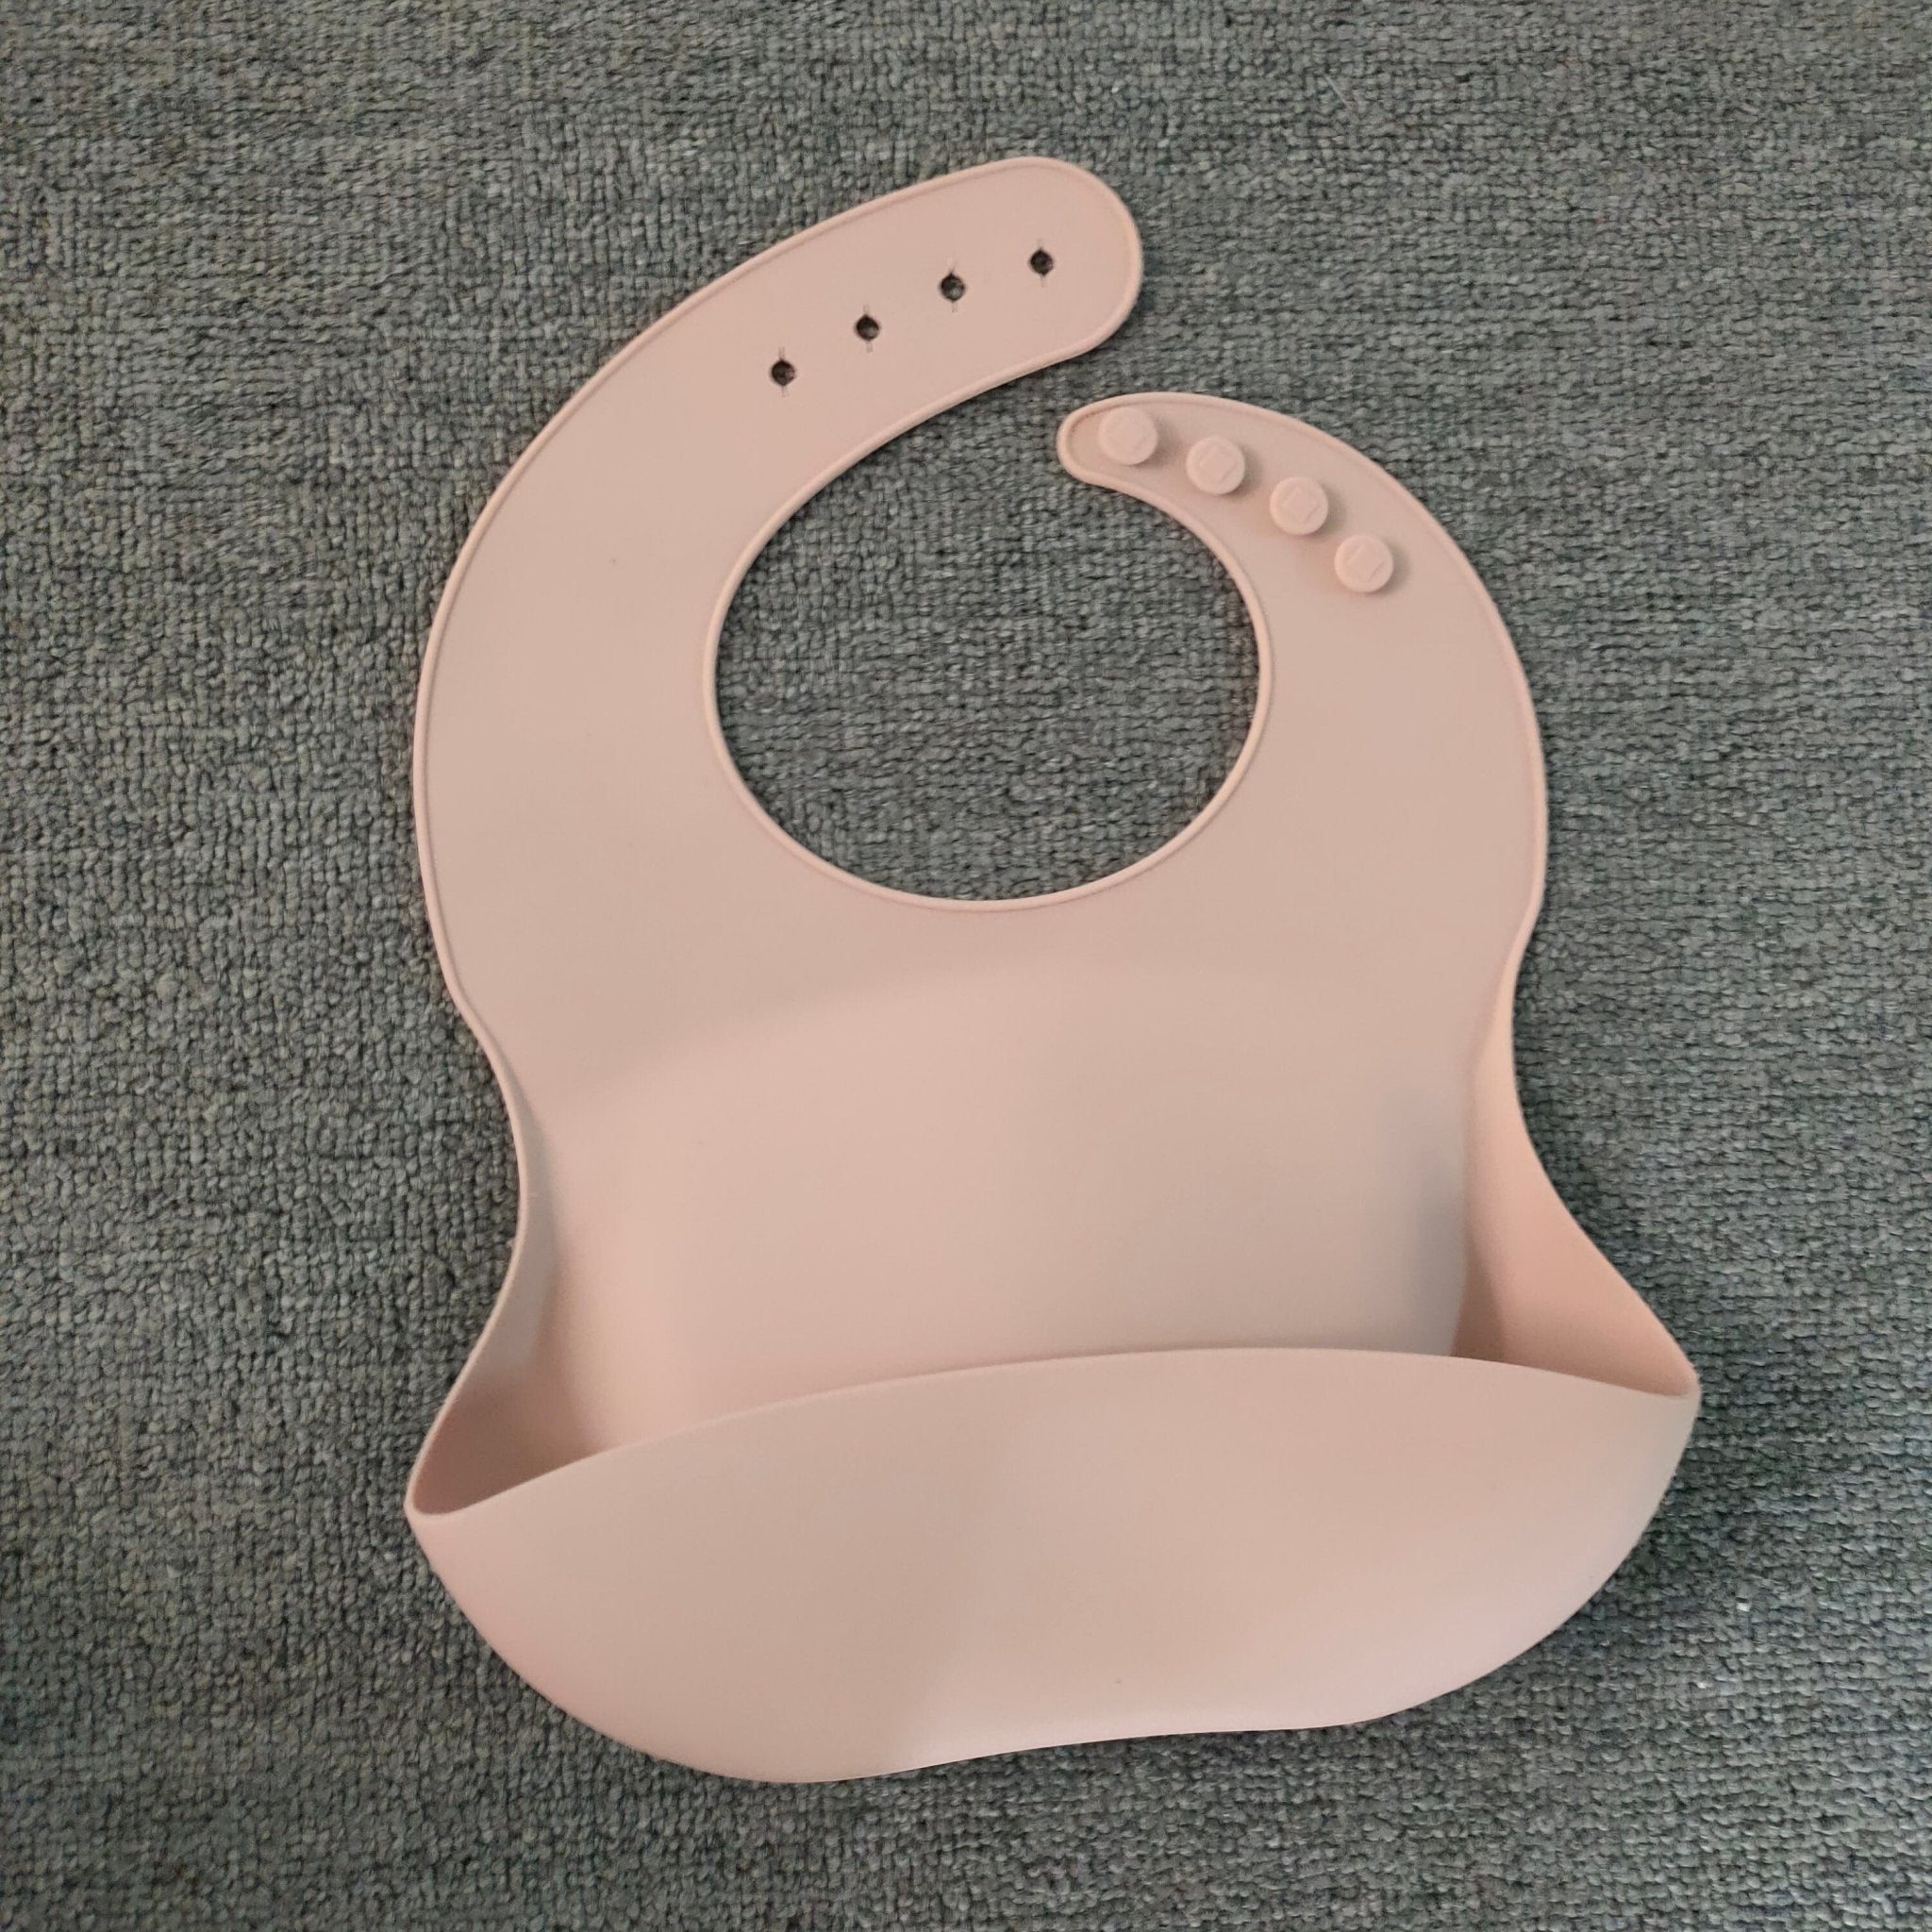 Soft Waterproof Silicone Baby Bib with Food Catcher, Baby Silicone Bib - Baby Bibs -  Trend Goods